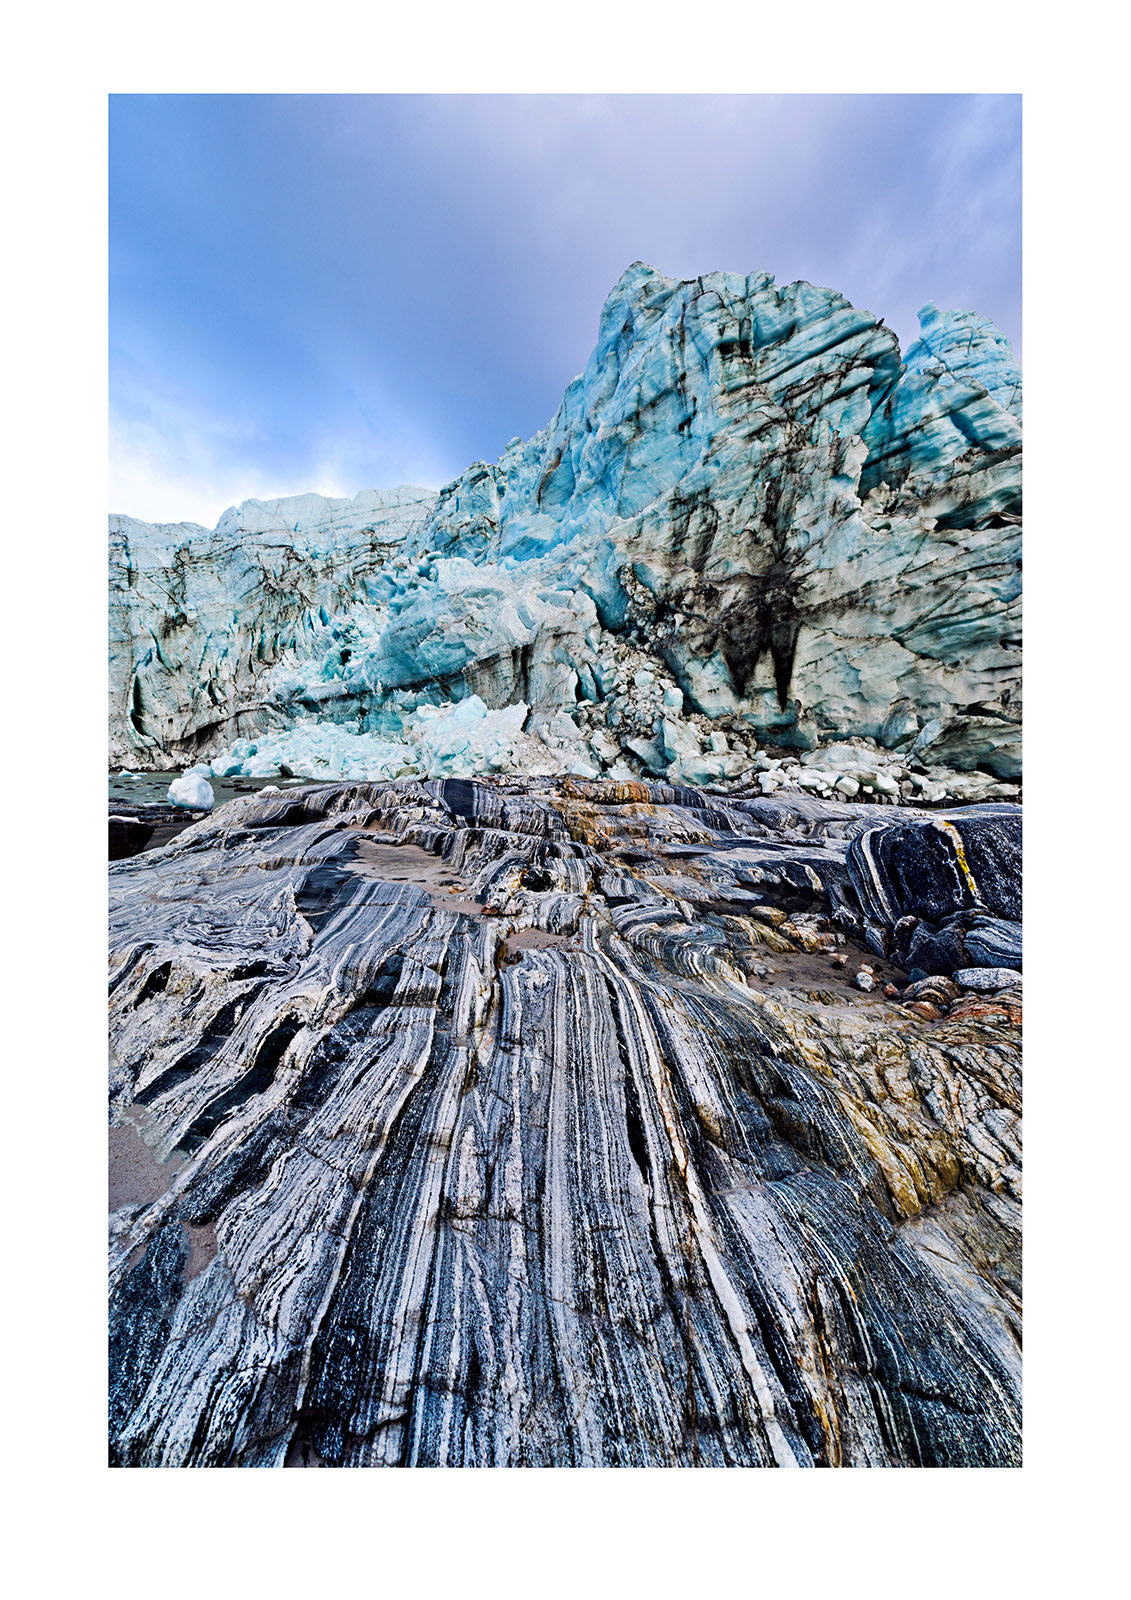 Striations and waterholes carved into the bedrock by ice erosion as a glacier receded. Russell Glacier, Greenland Ice Sheet, Qeqqata Municipality, Kangerlussuaq, Greenland.